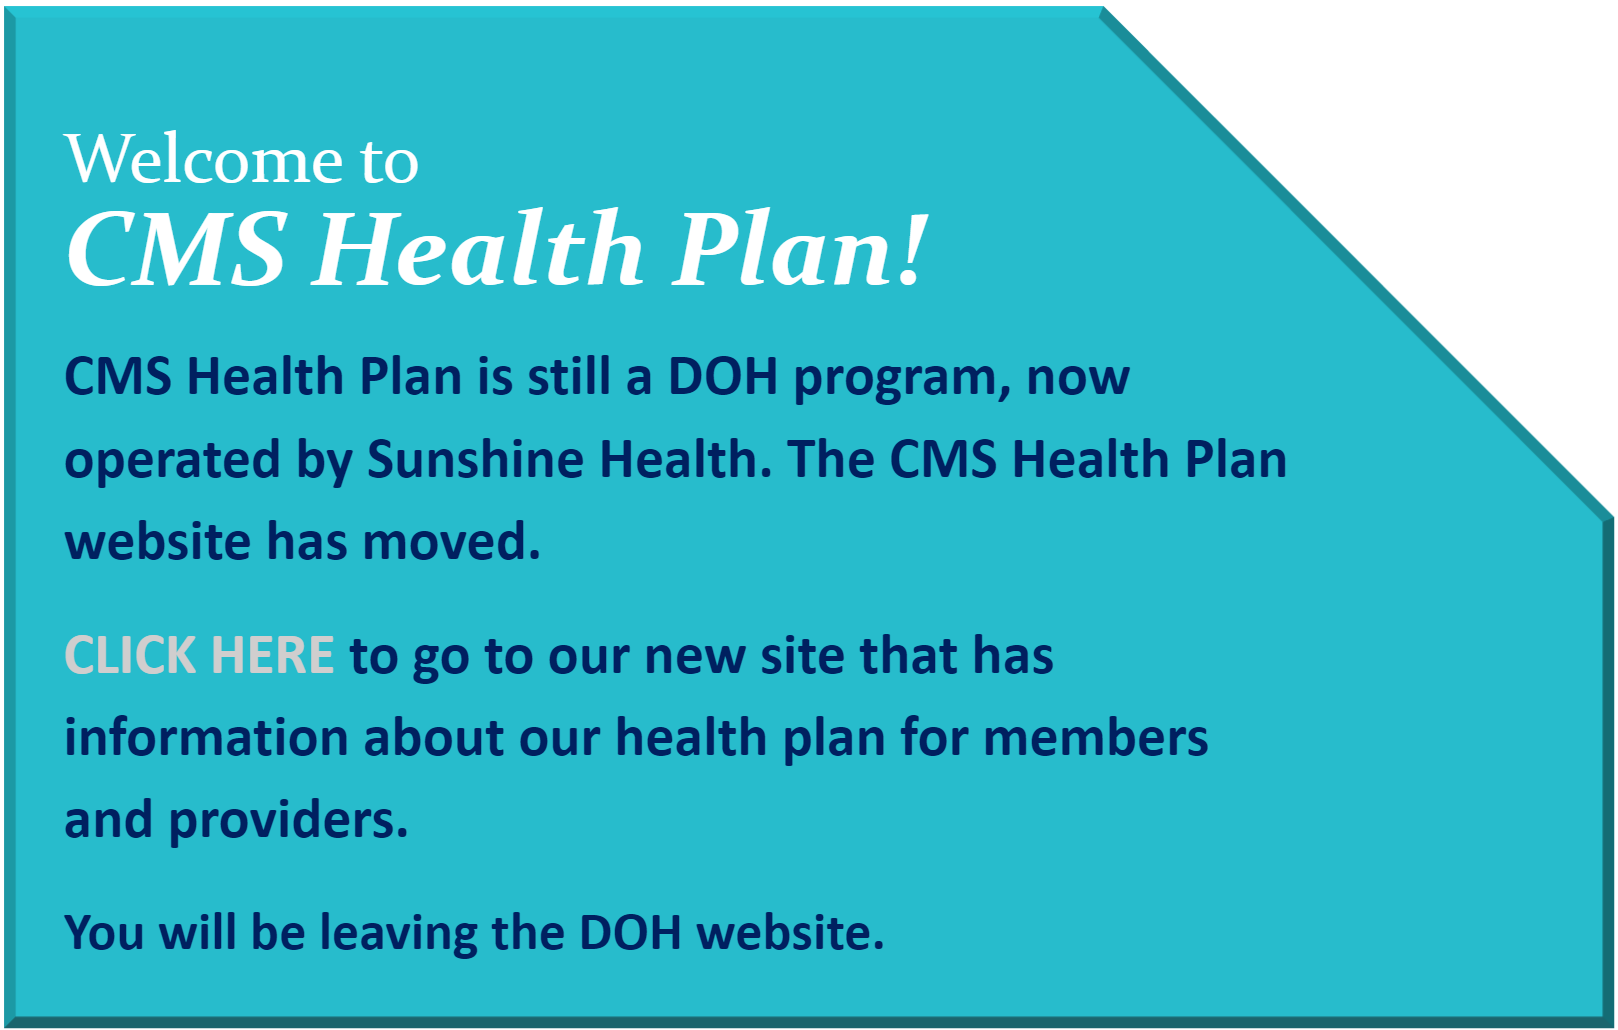 CMS Health Plan is still a DOH program, now operated by WellCare.  The CMS Health Plan website has moved.  Stick around and this page will take you to our new site that has information about our health plan for members and providers.  You will be leaving the DOH website.